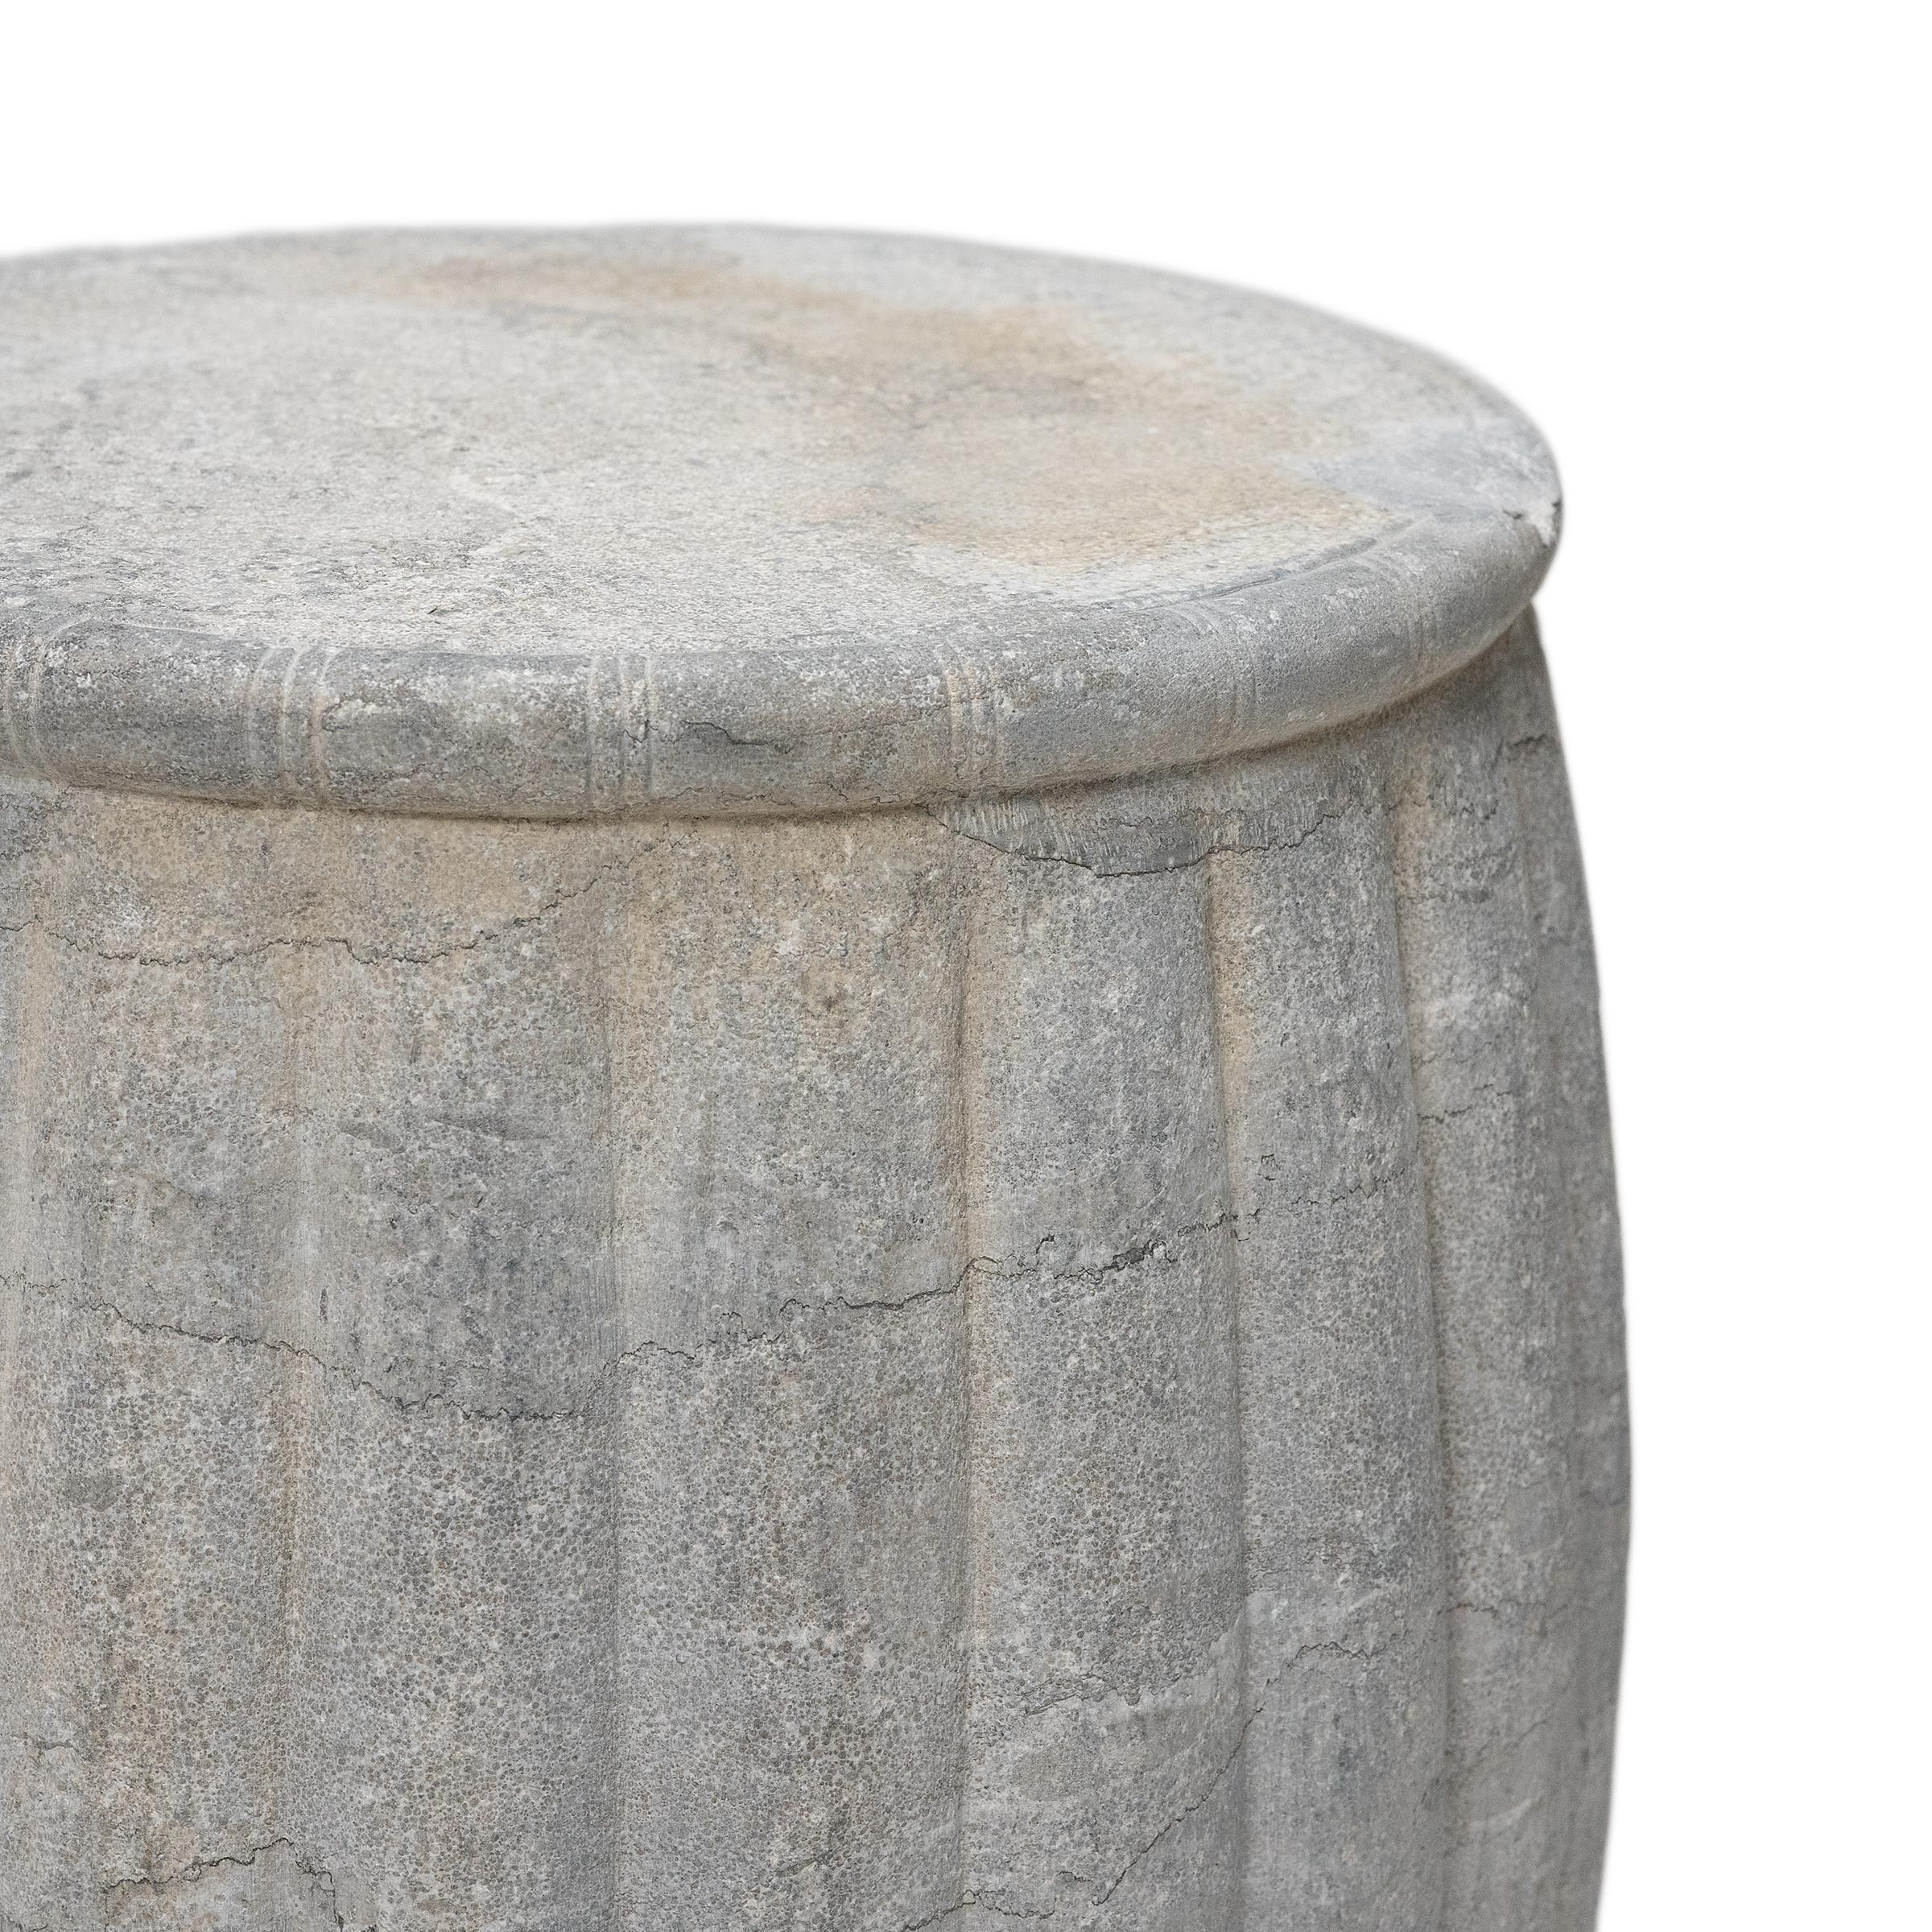 Carved Chinese Melon Stone Drum